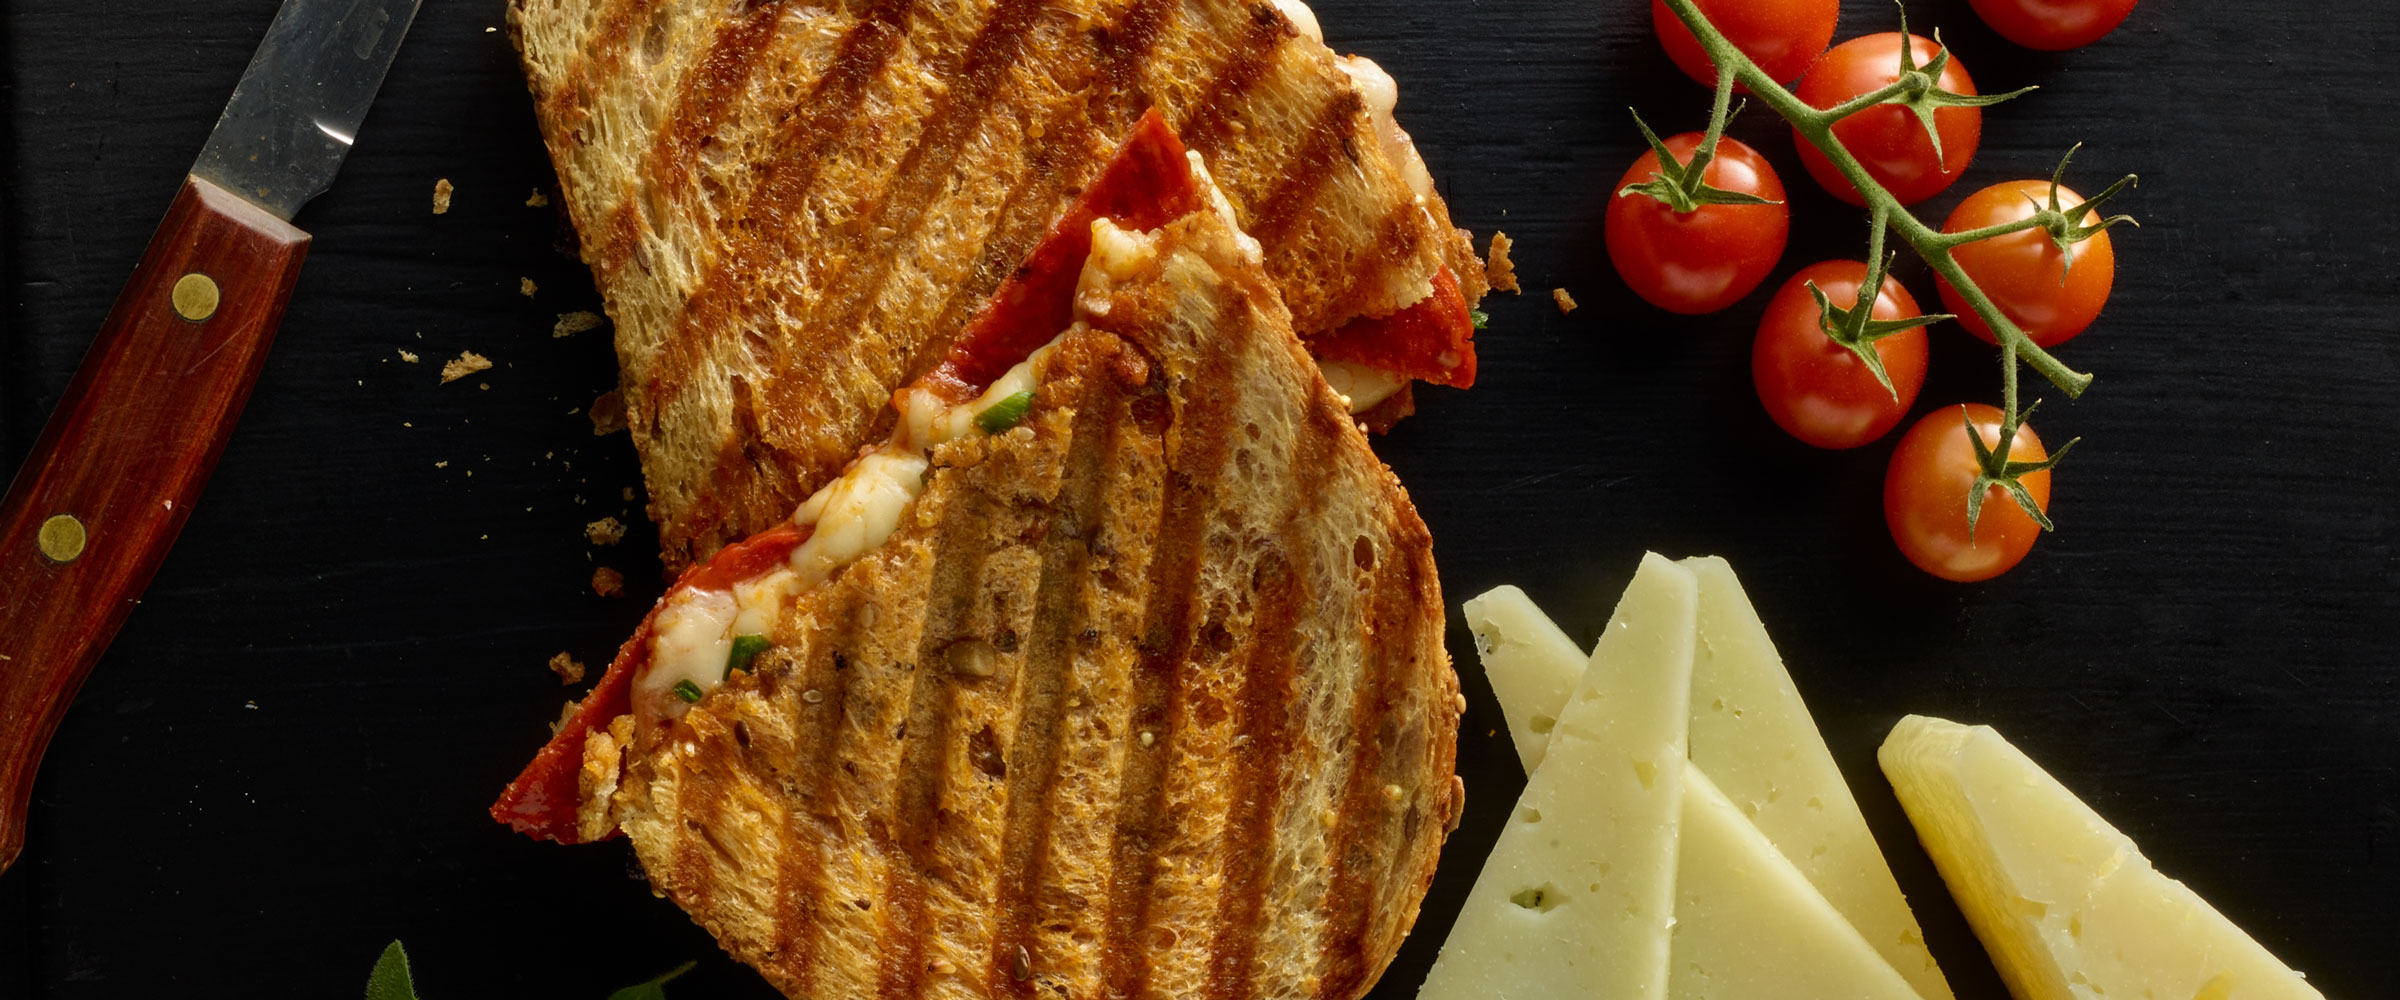 Chorizo Panini sliced in half with cheese and tomatoes on side